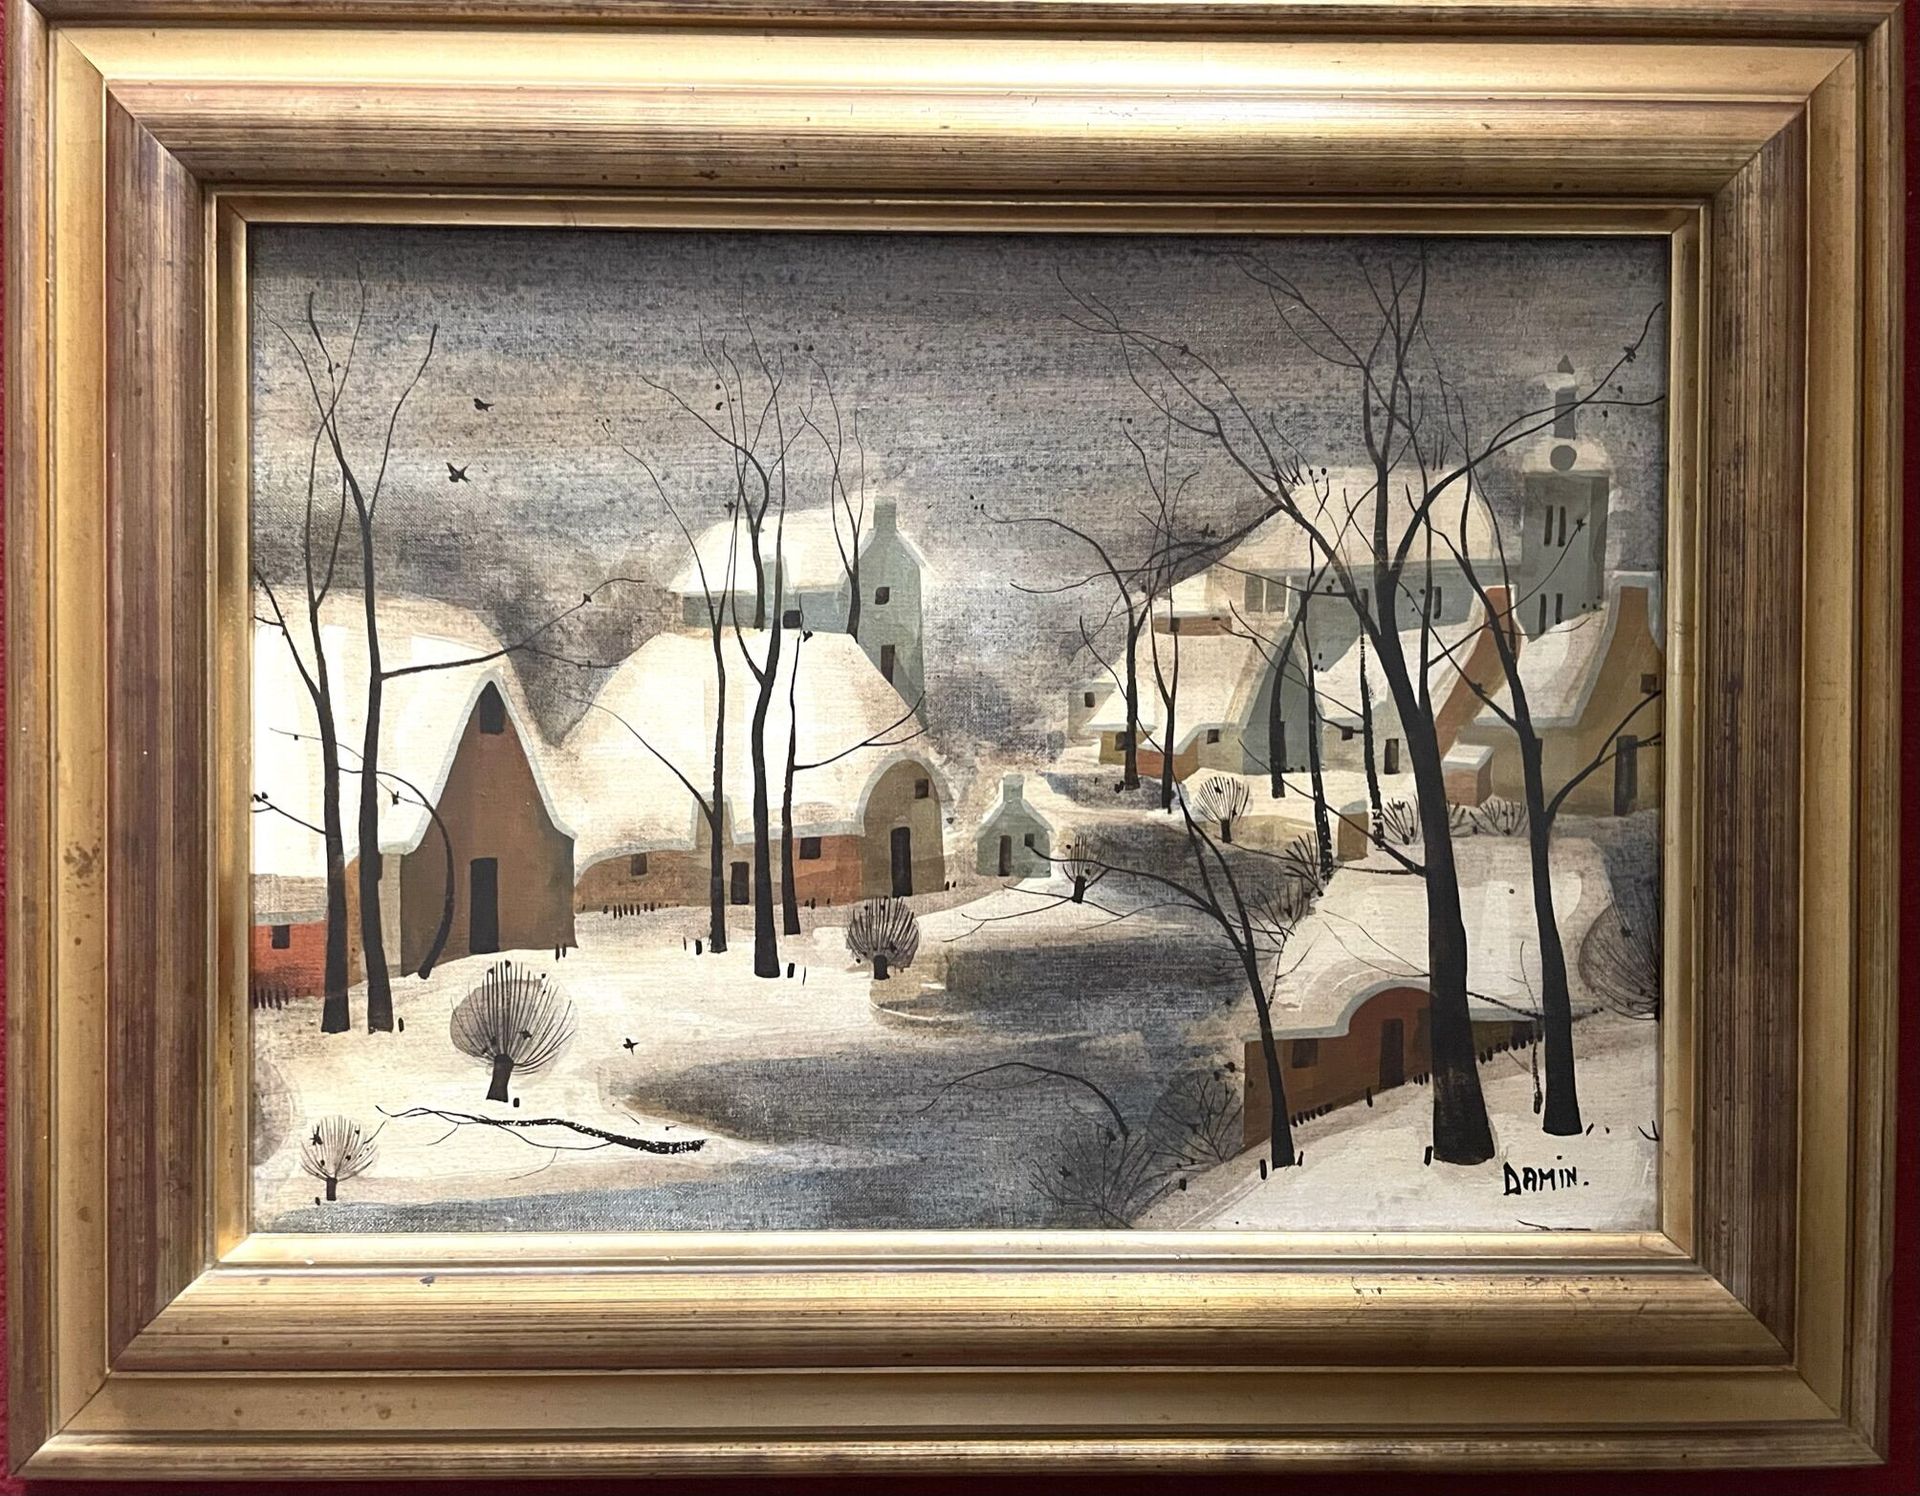 Null Georges DAMIN (born in 1942)

"Village under the snow".

Oil on canvas.

Si&hellip;